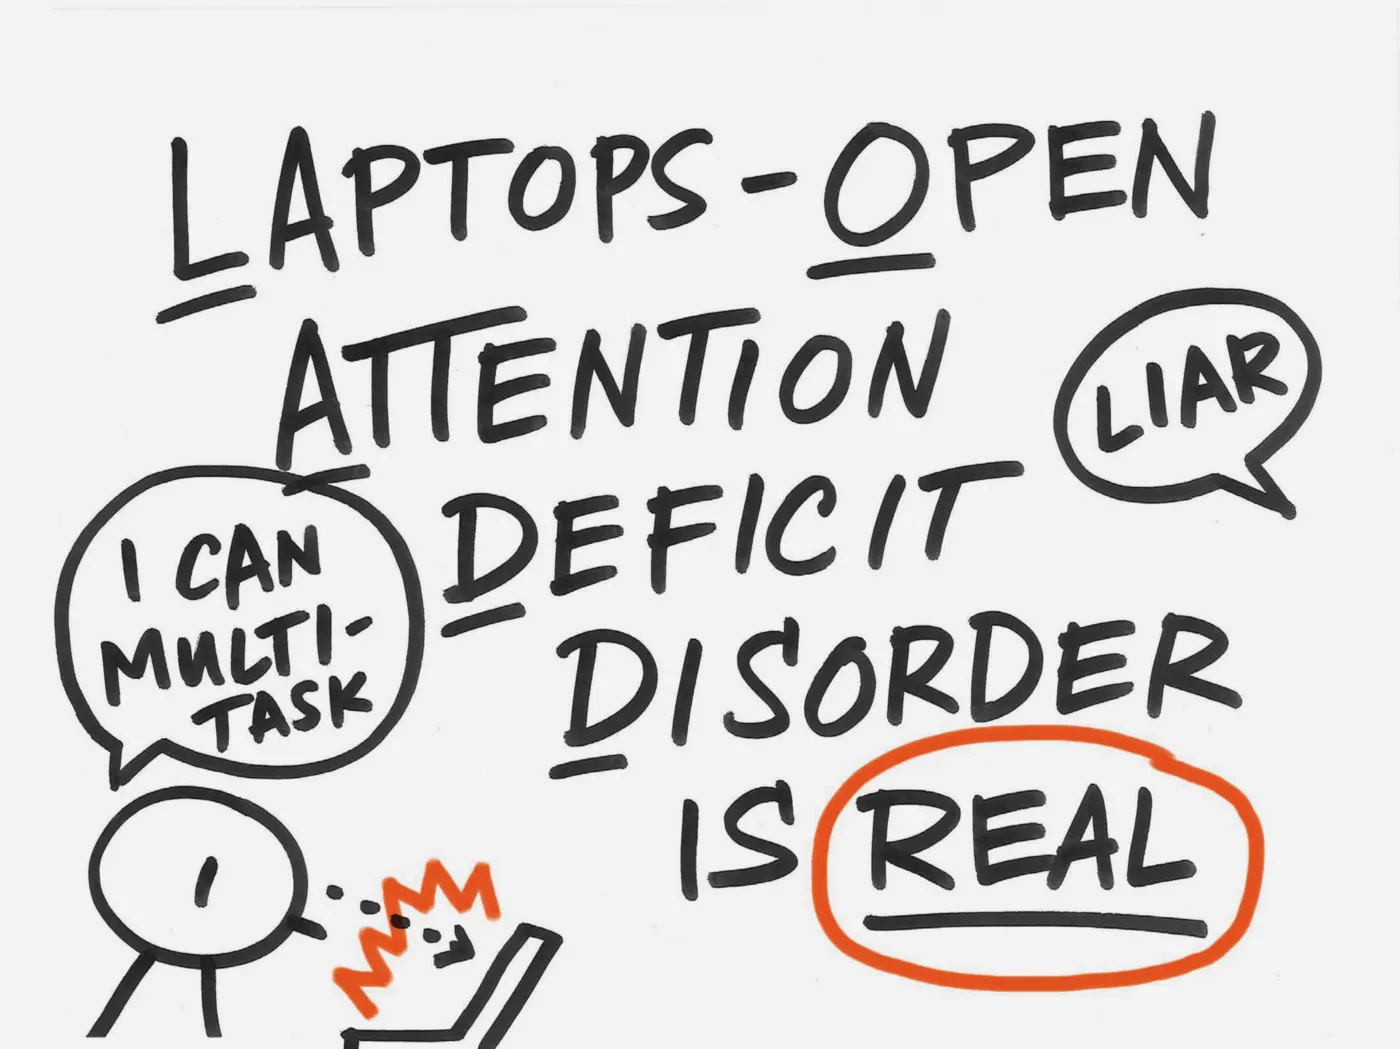 "Laptops-open Attention Deficit Disorder is Real" written in black marker alongside a stick figure viewing a laptop with "I can multitask" in a speech bubble.